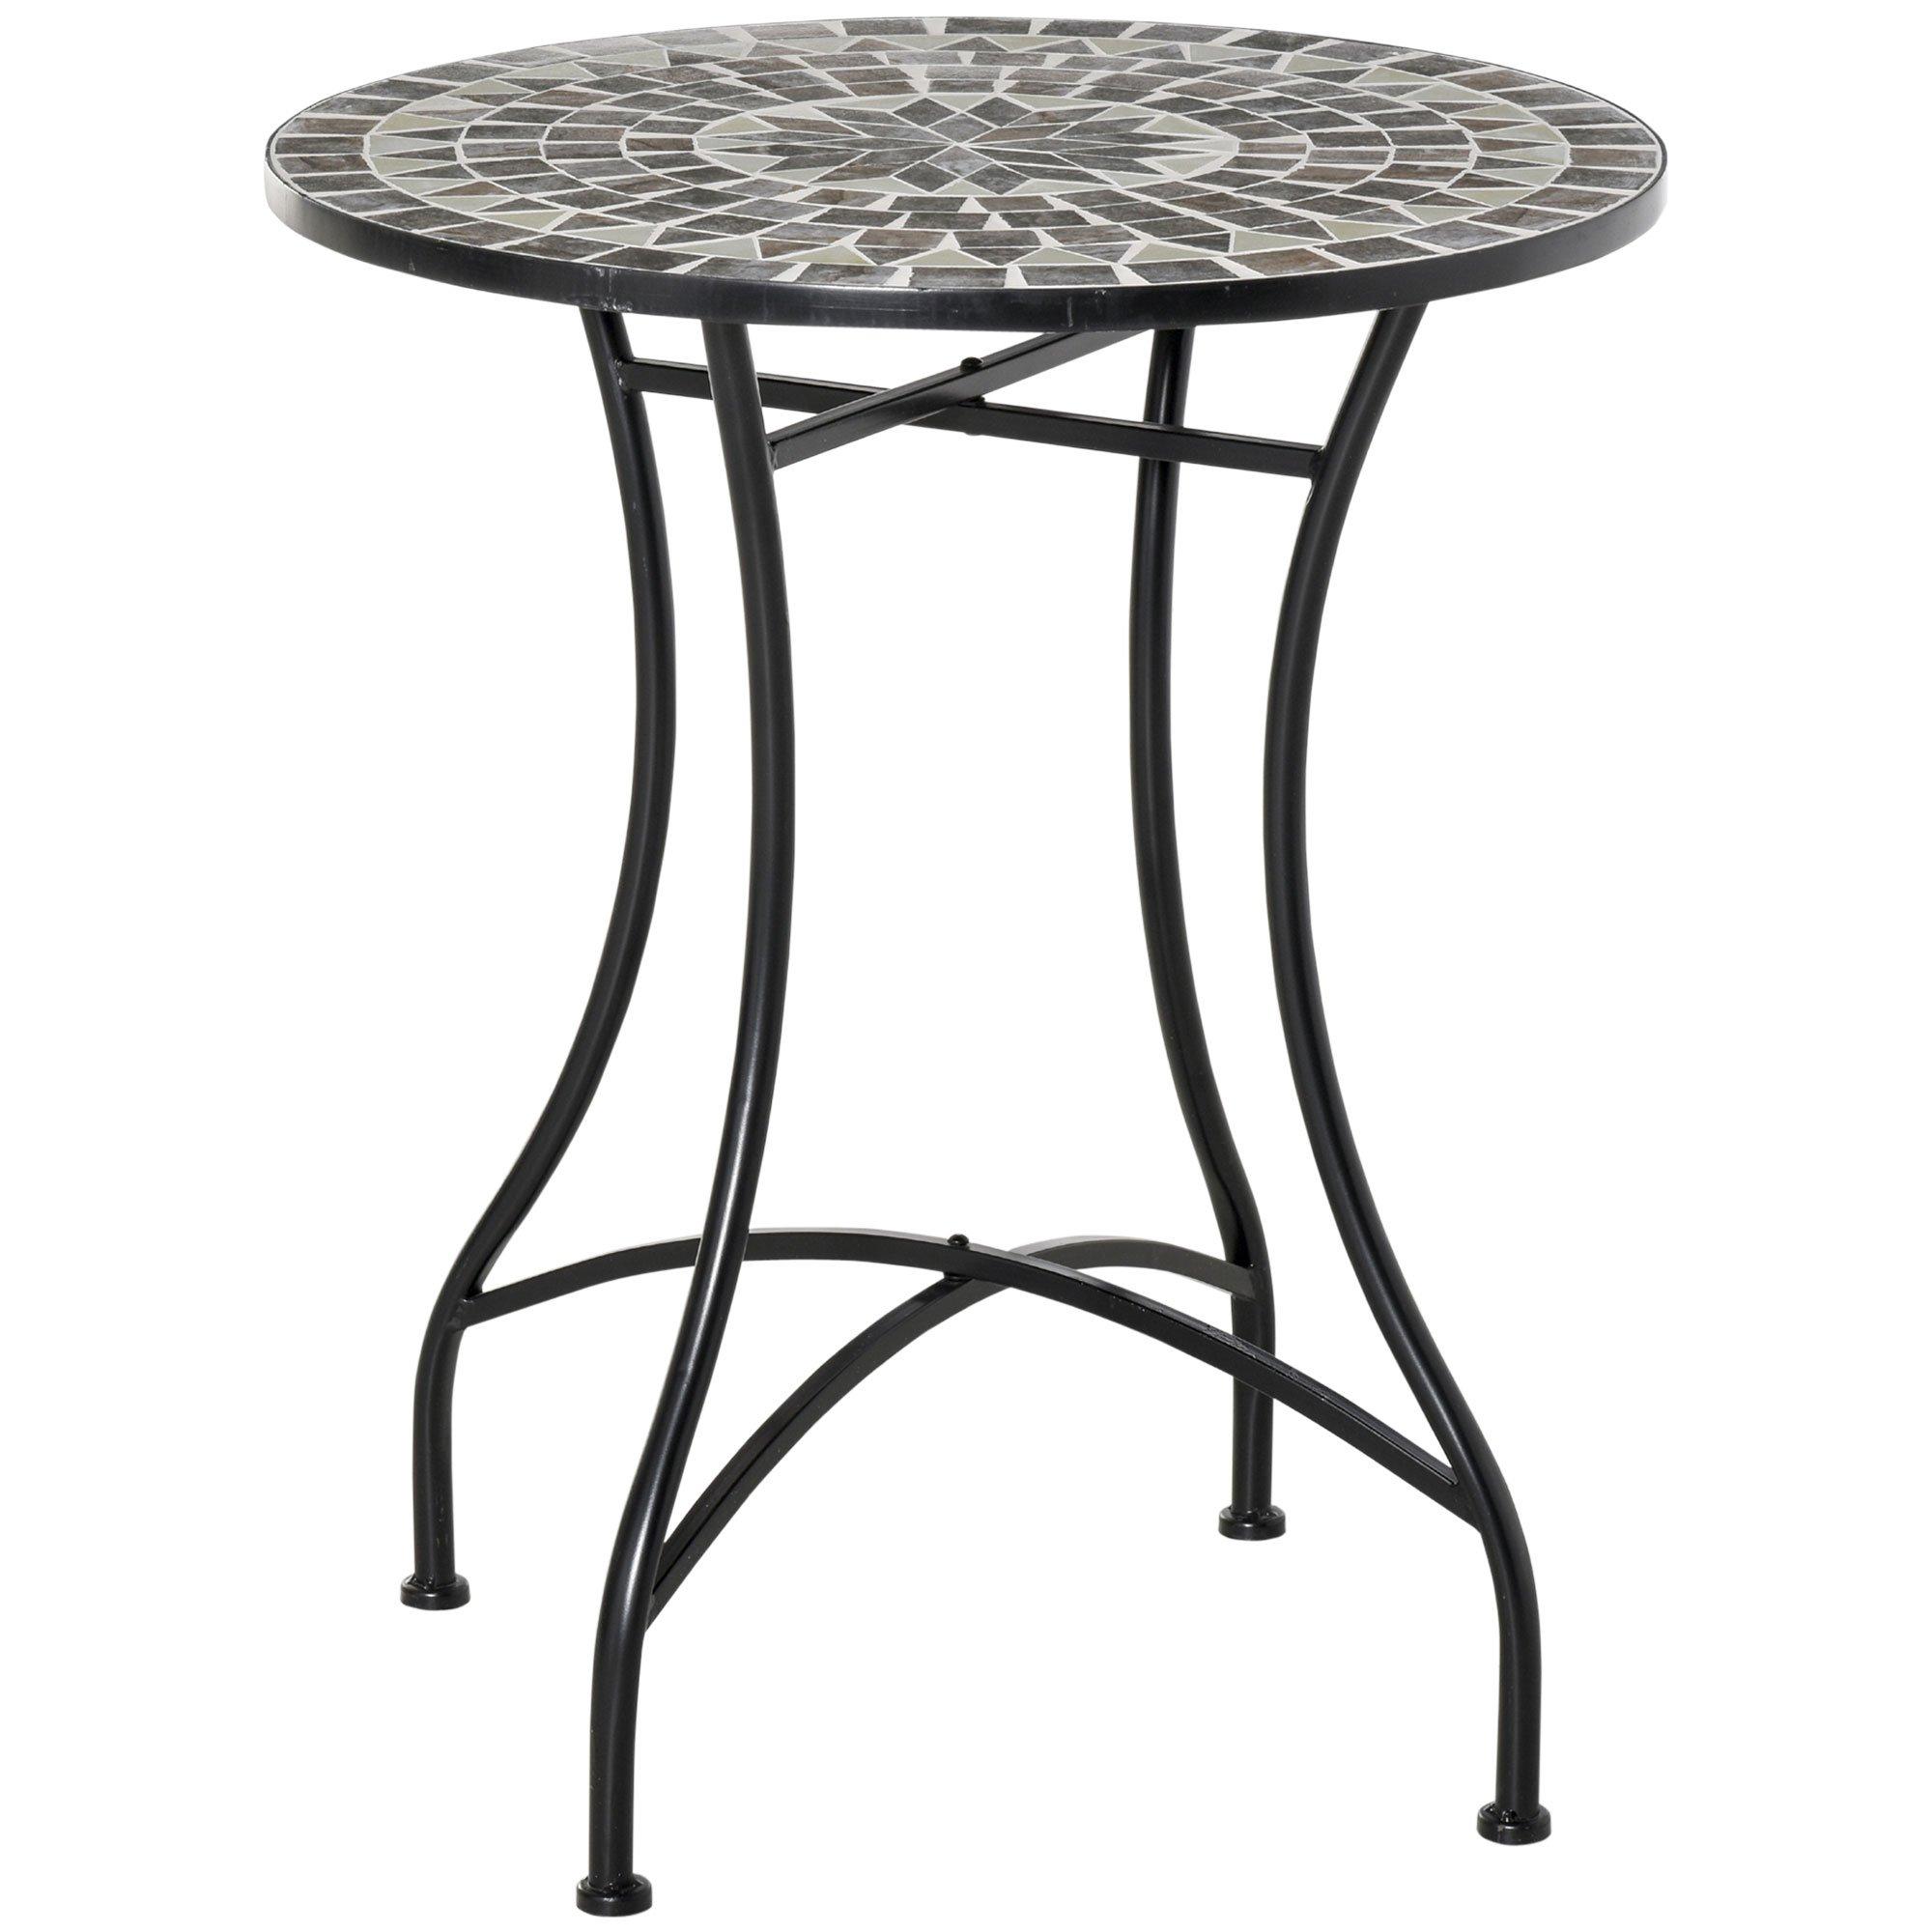 Mosaic Side Table Bistro Coffee Table for Garden Patio Balcony Grey